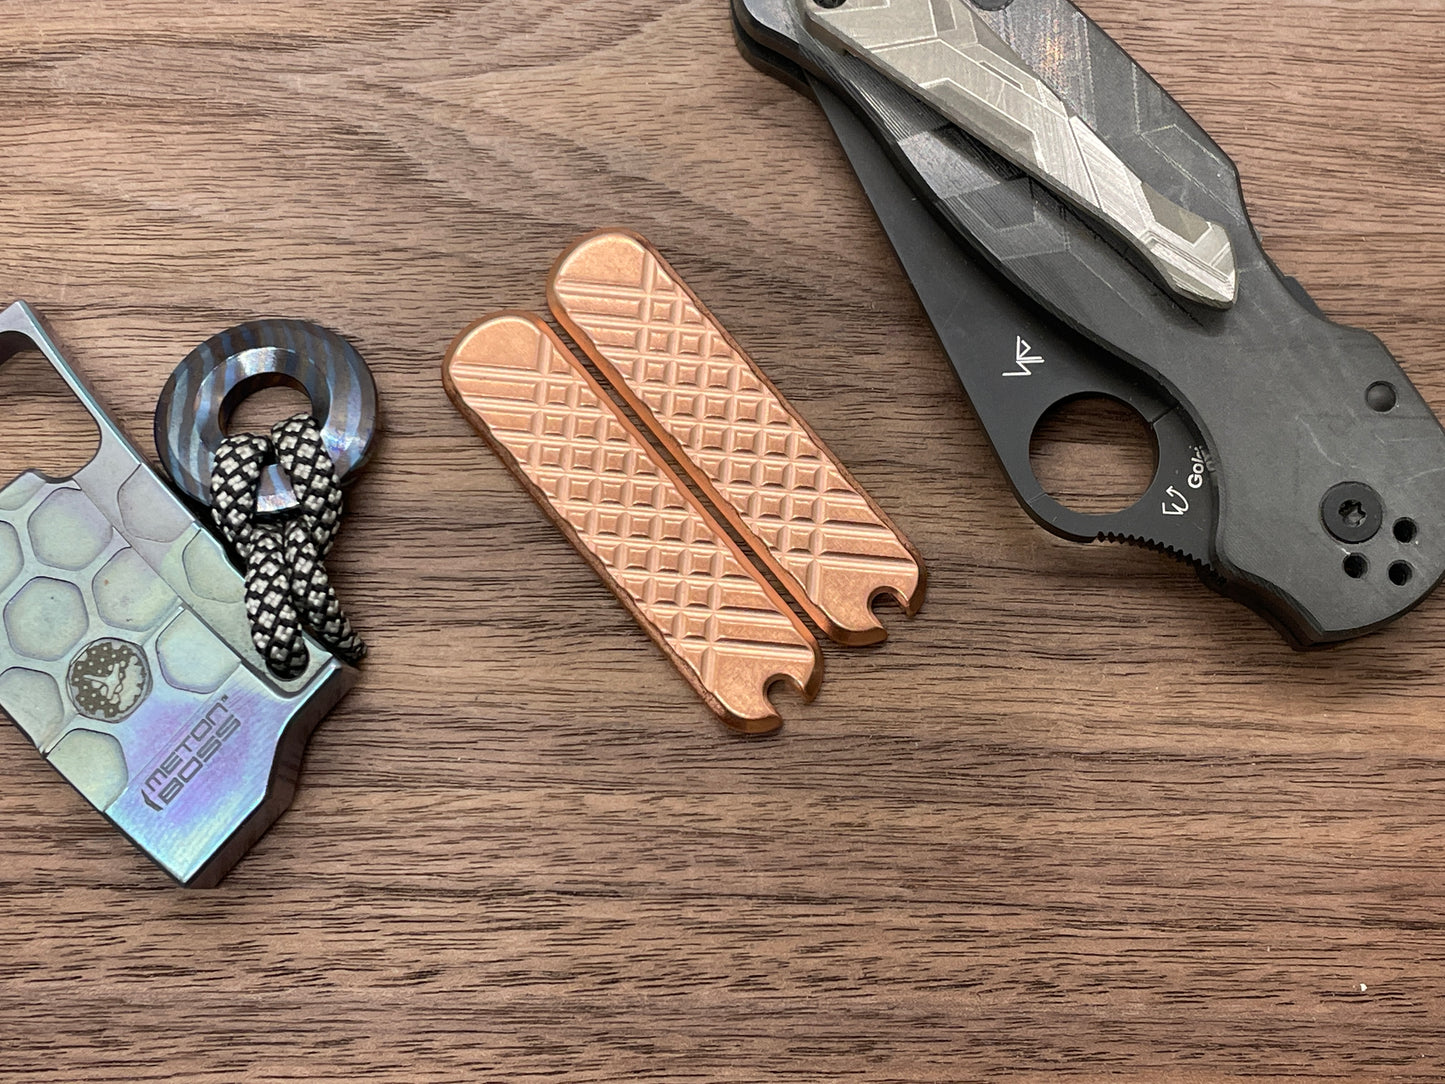 58mm FRAG milled Tumbled Copper Scales for Swiss Army SAK